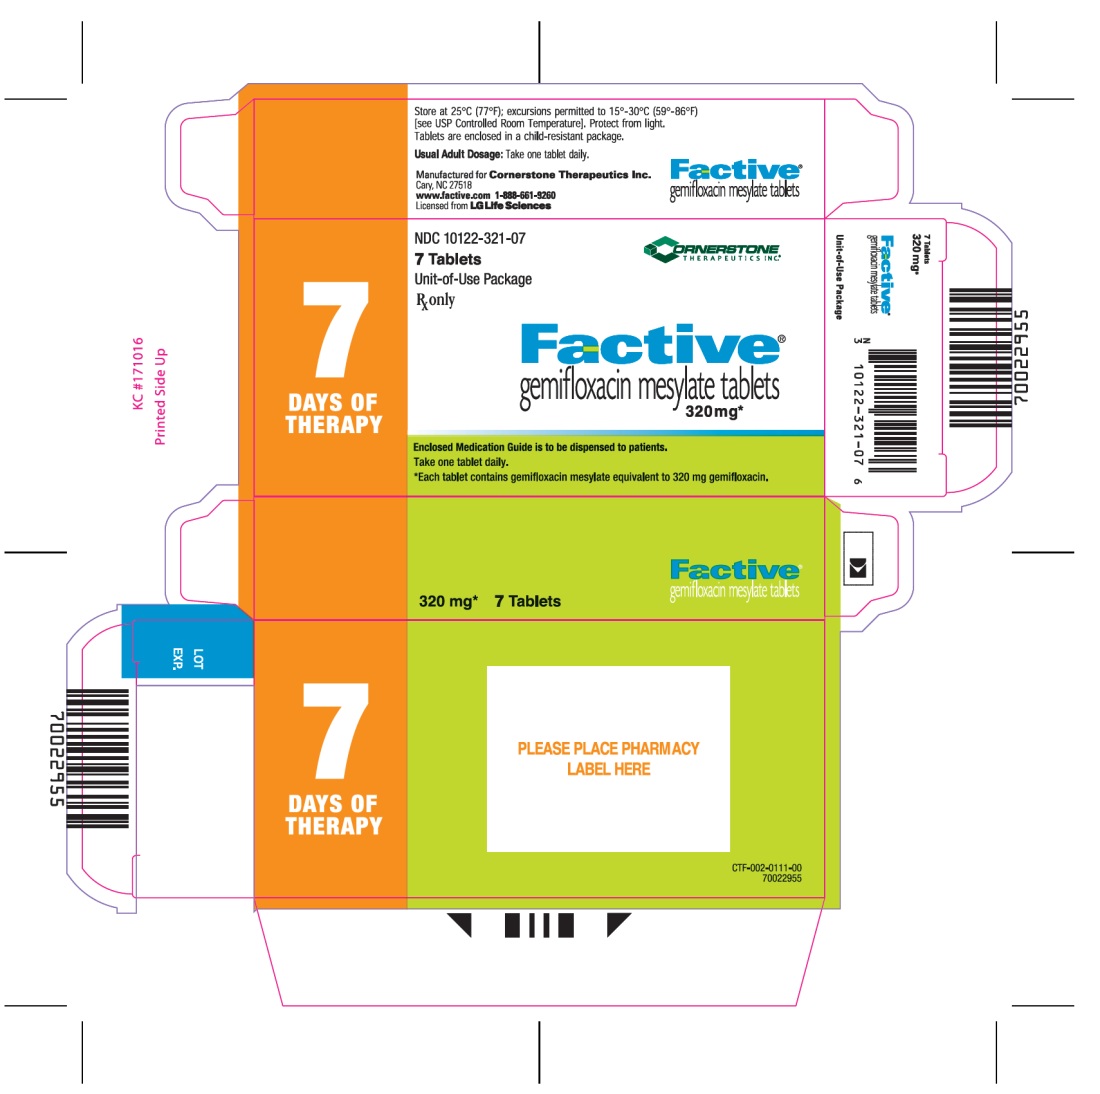 Factive 7 Tablets